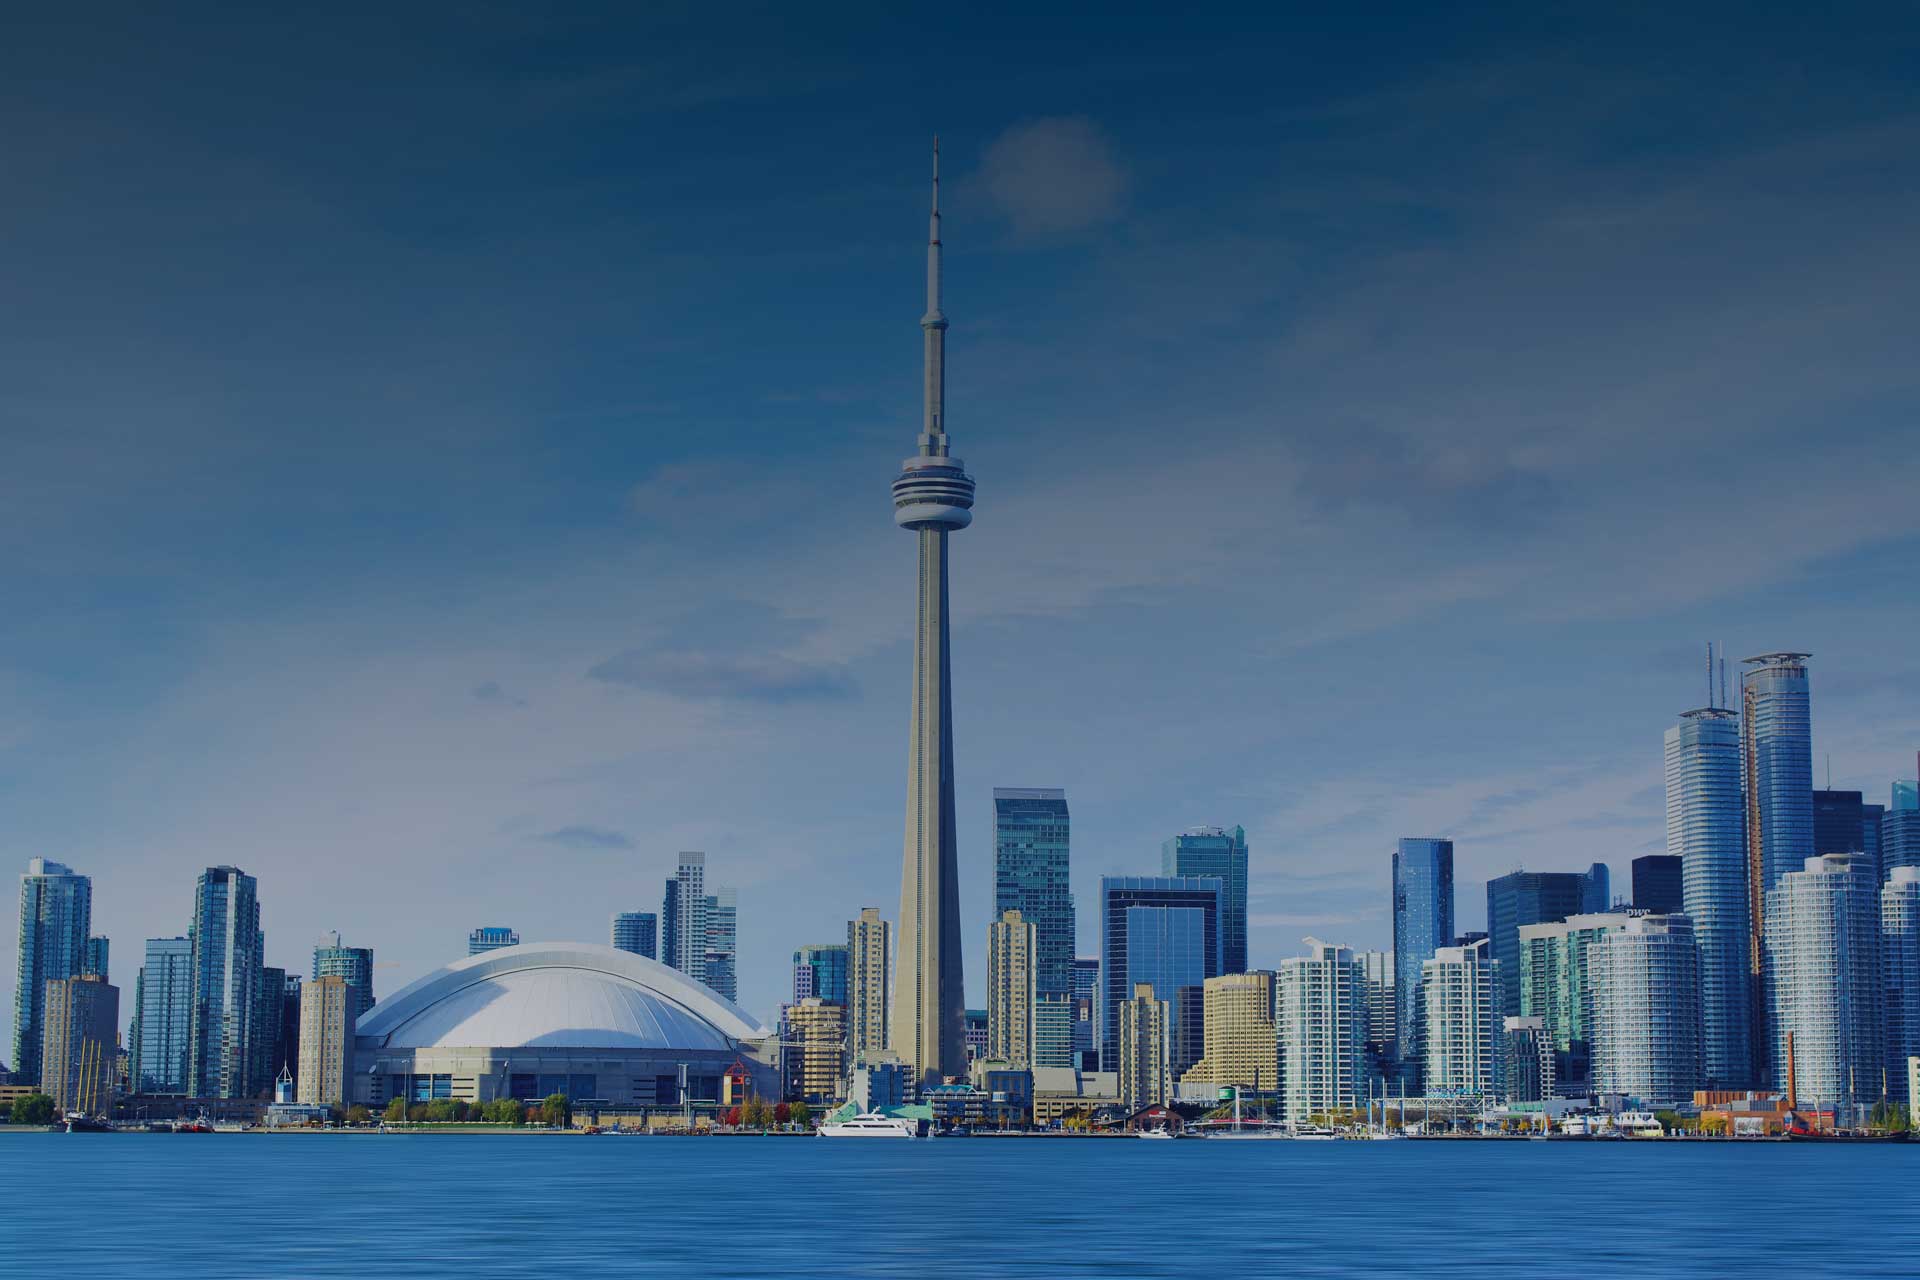 Photograph of Toronto's skyline from the water